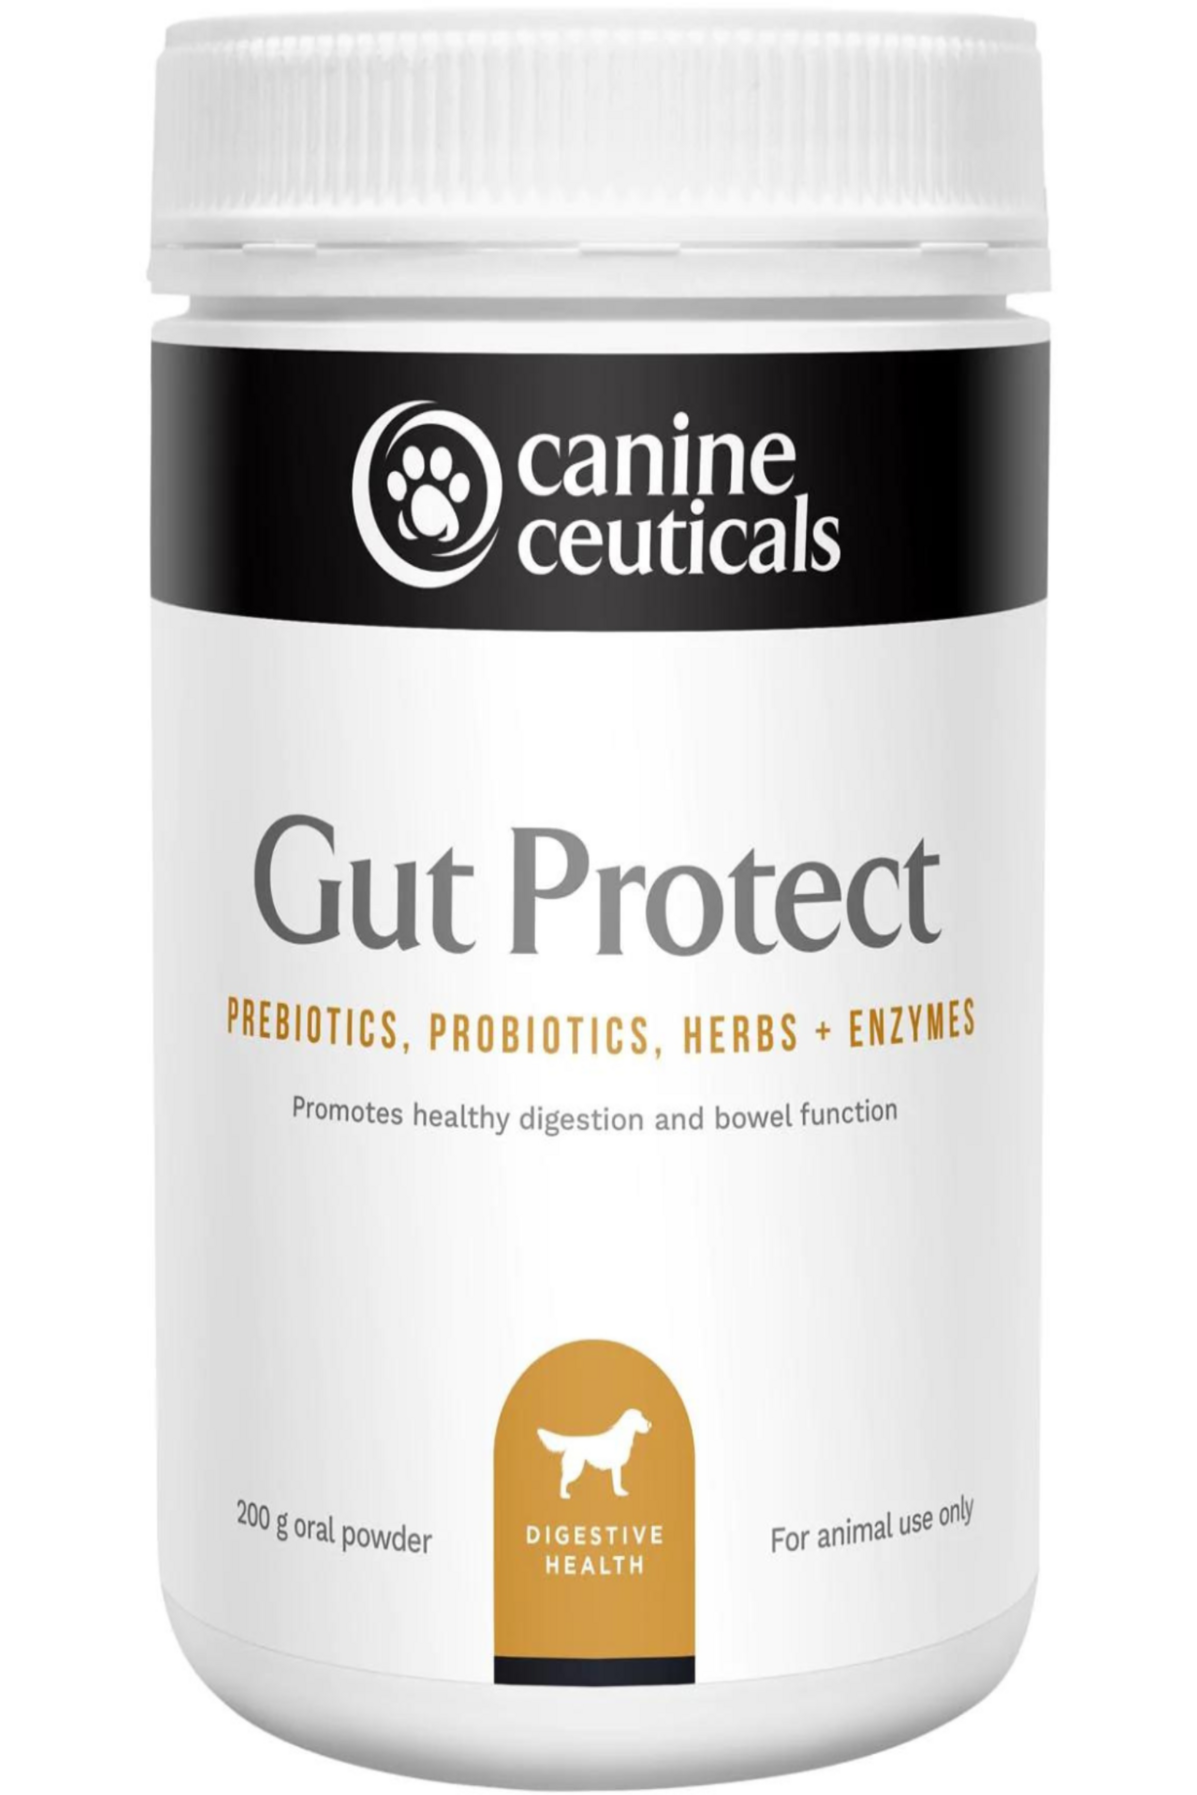 CanineCeuticals - Gut Protect